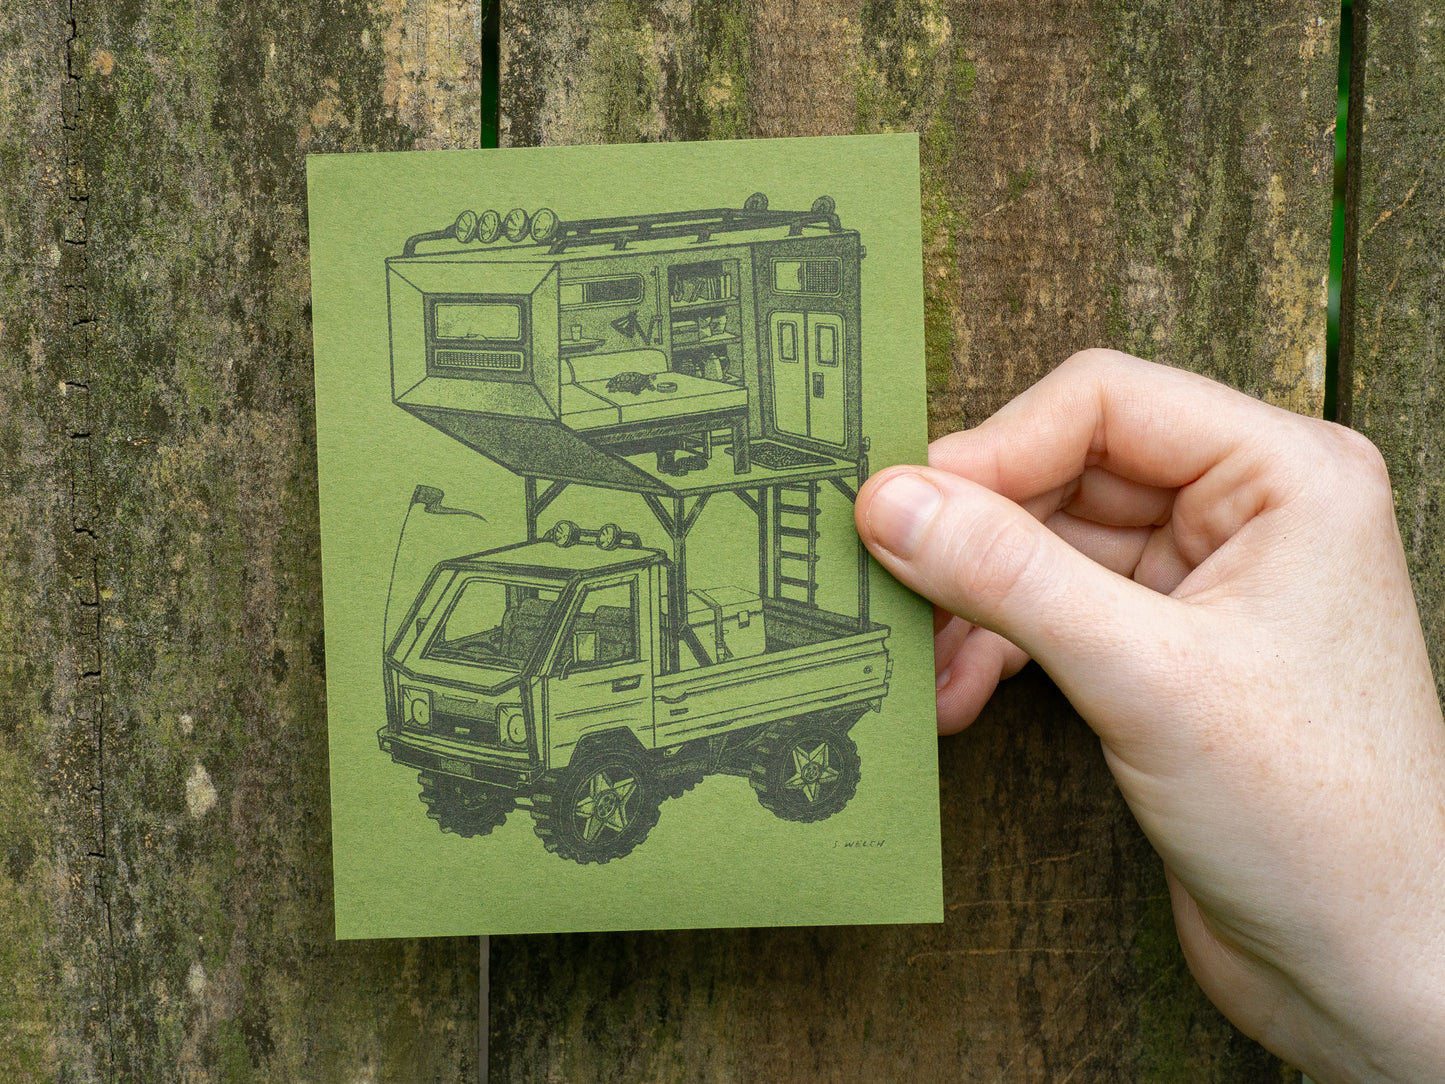 Kei truck art print on green paper held in front of a wooden fence.